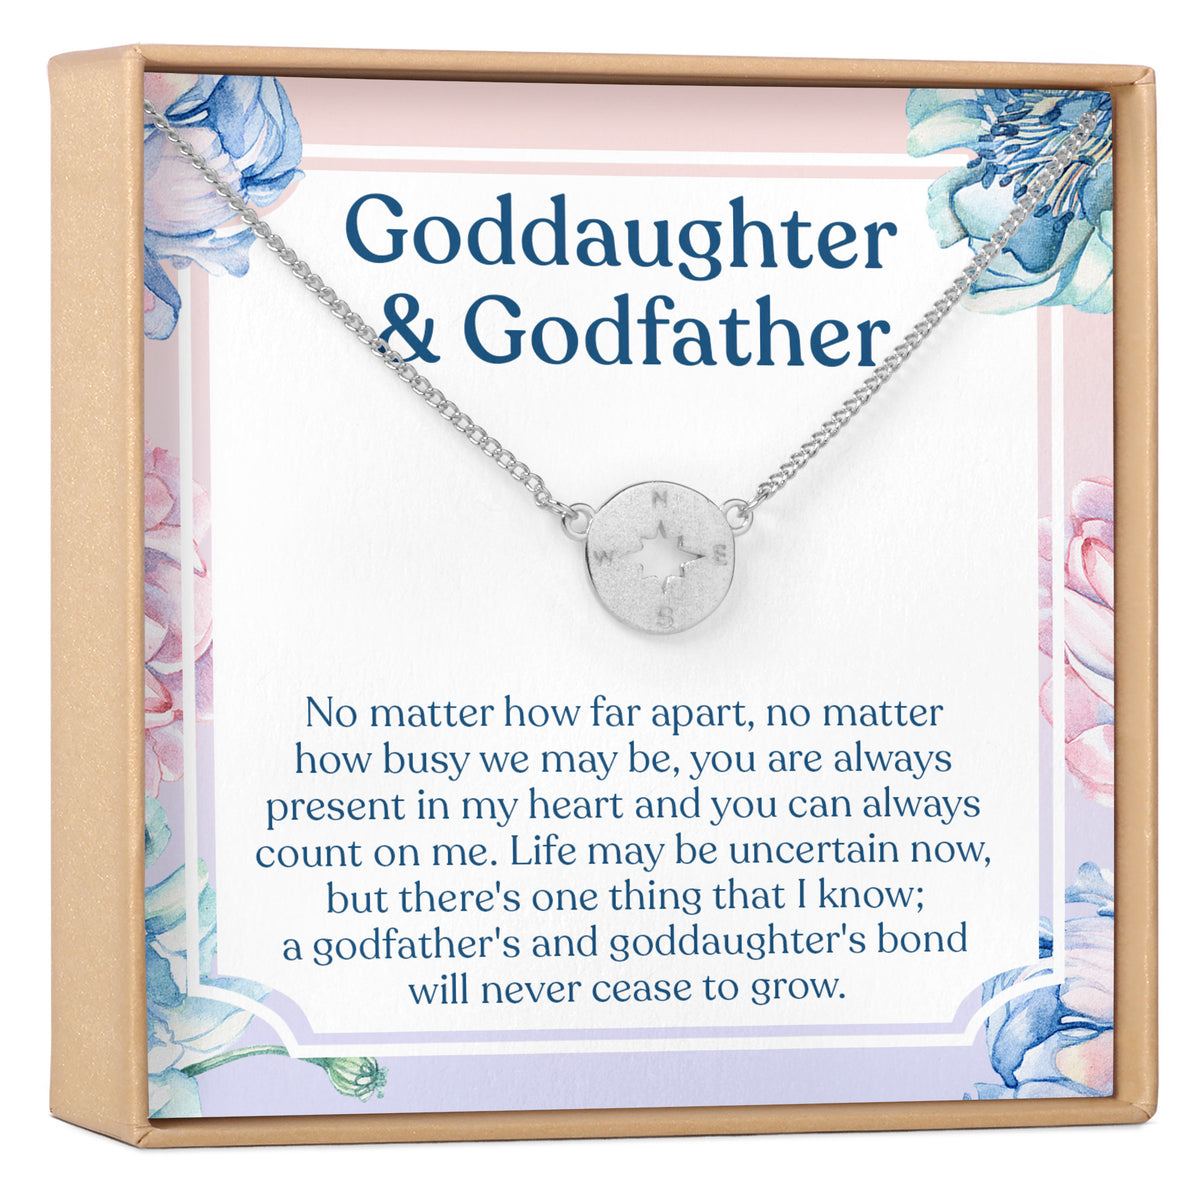 Goddaughter &amp; Godfather Necklace, Multiple Styles Necklace